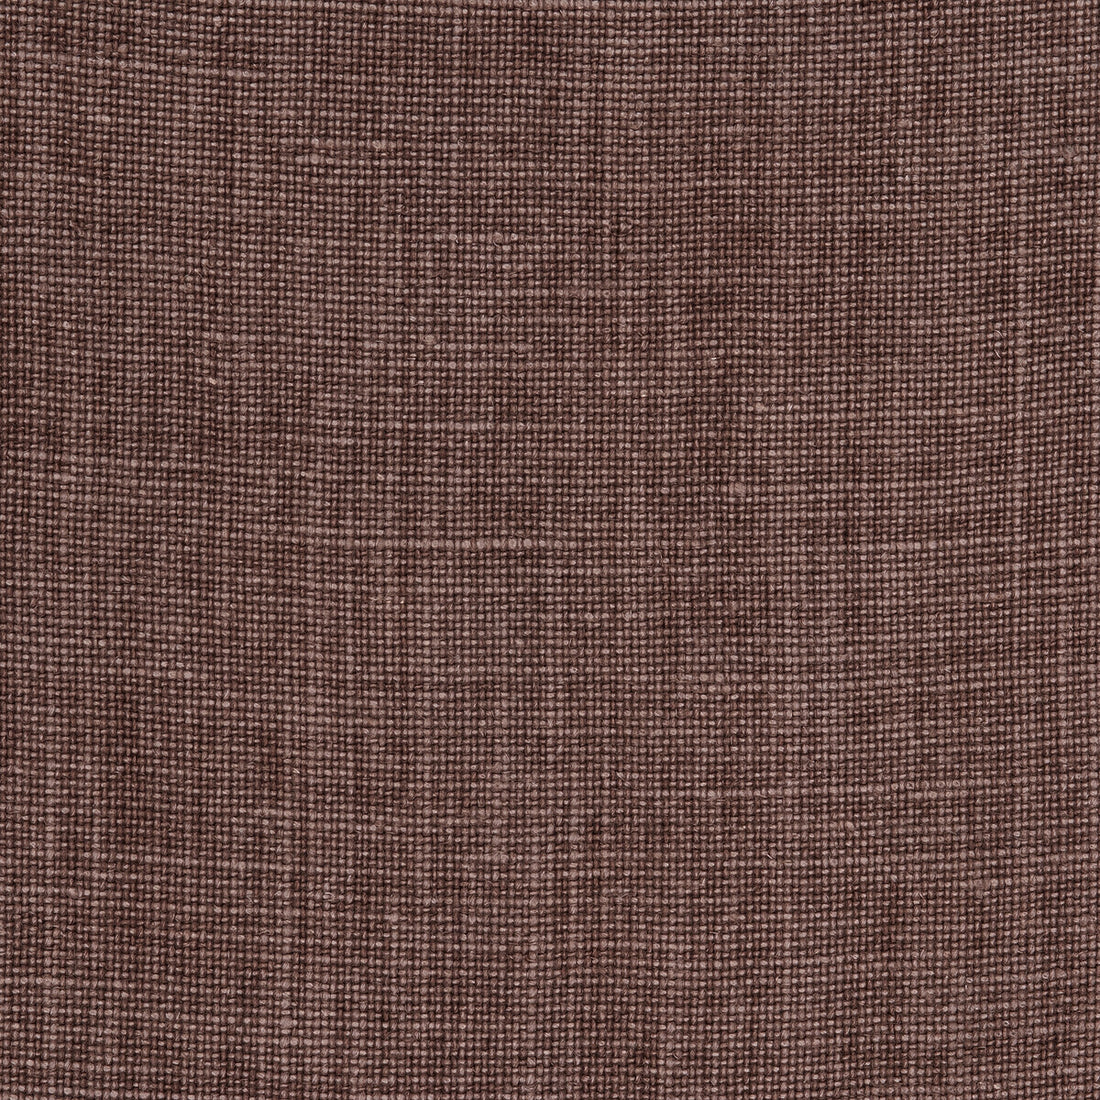 Weathered Linen fabric in old red color - pattern BF10962.451.0 - by G P &amp; J Baker in the Baker House Linens collection